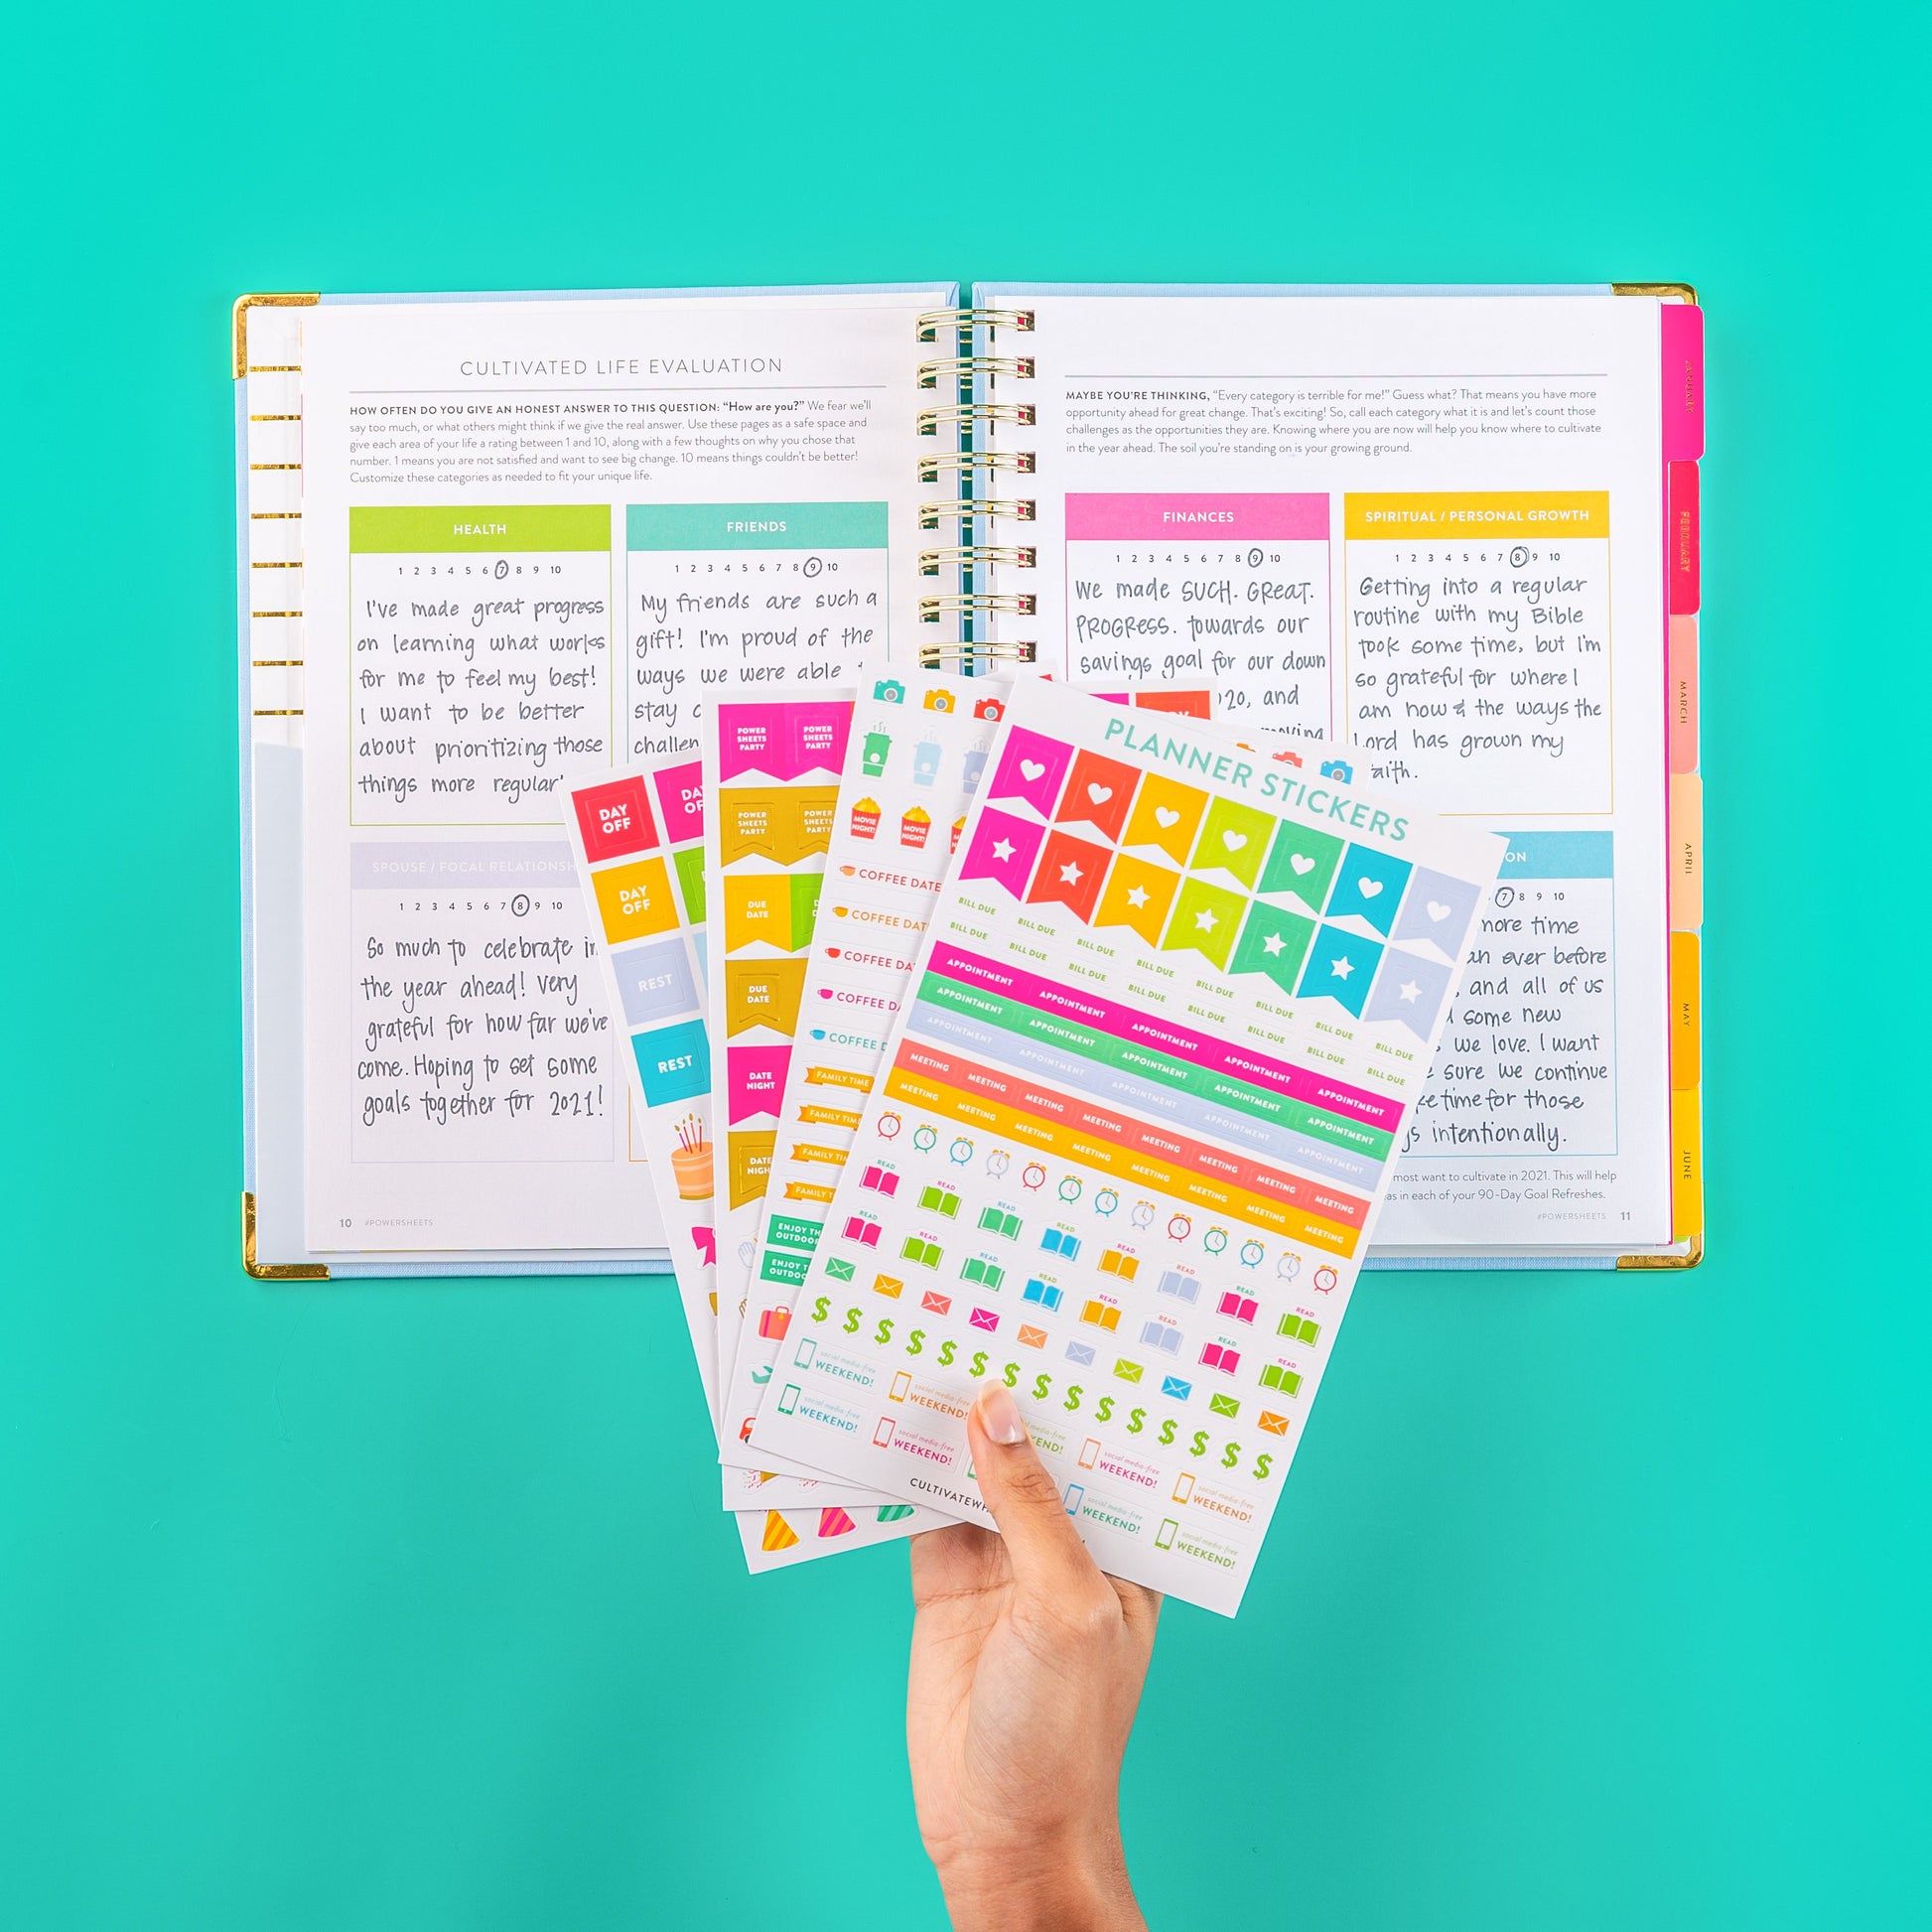 Essential Planner Stickers – Work Play Every Day